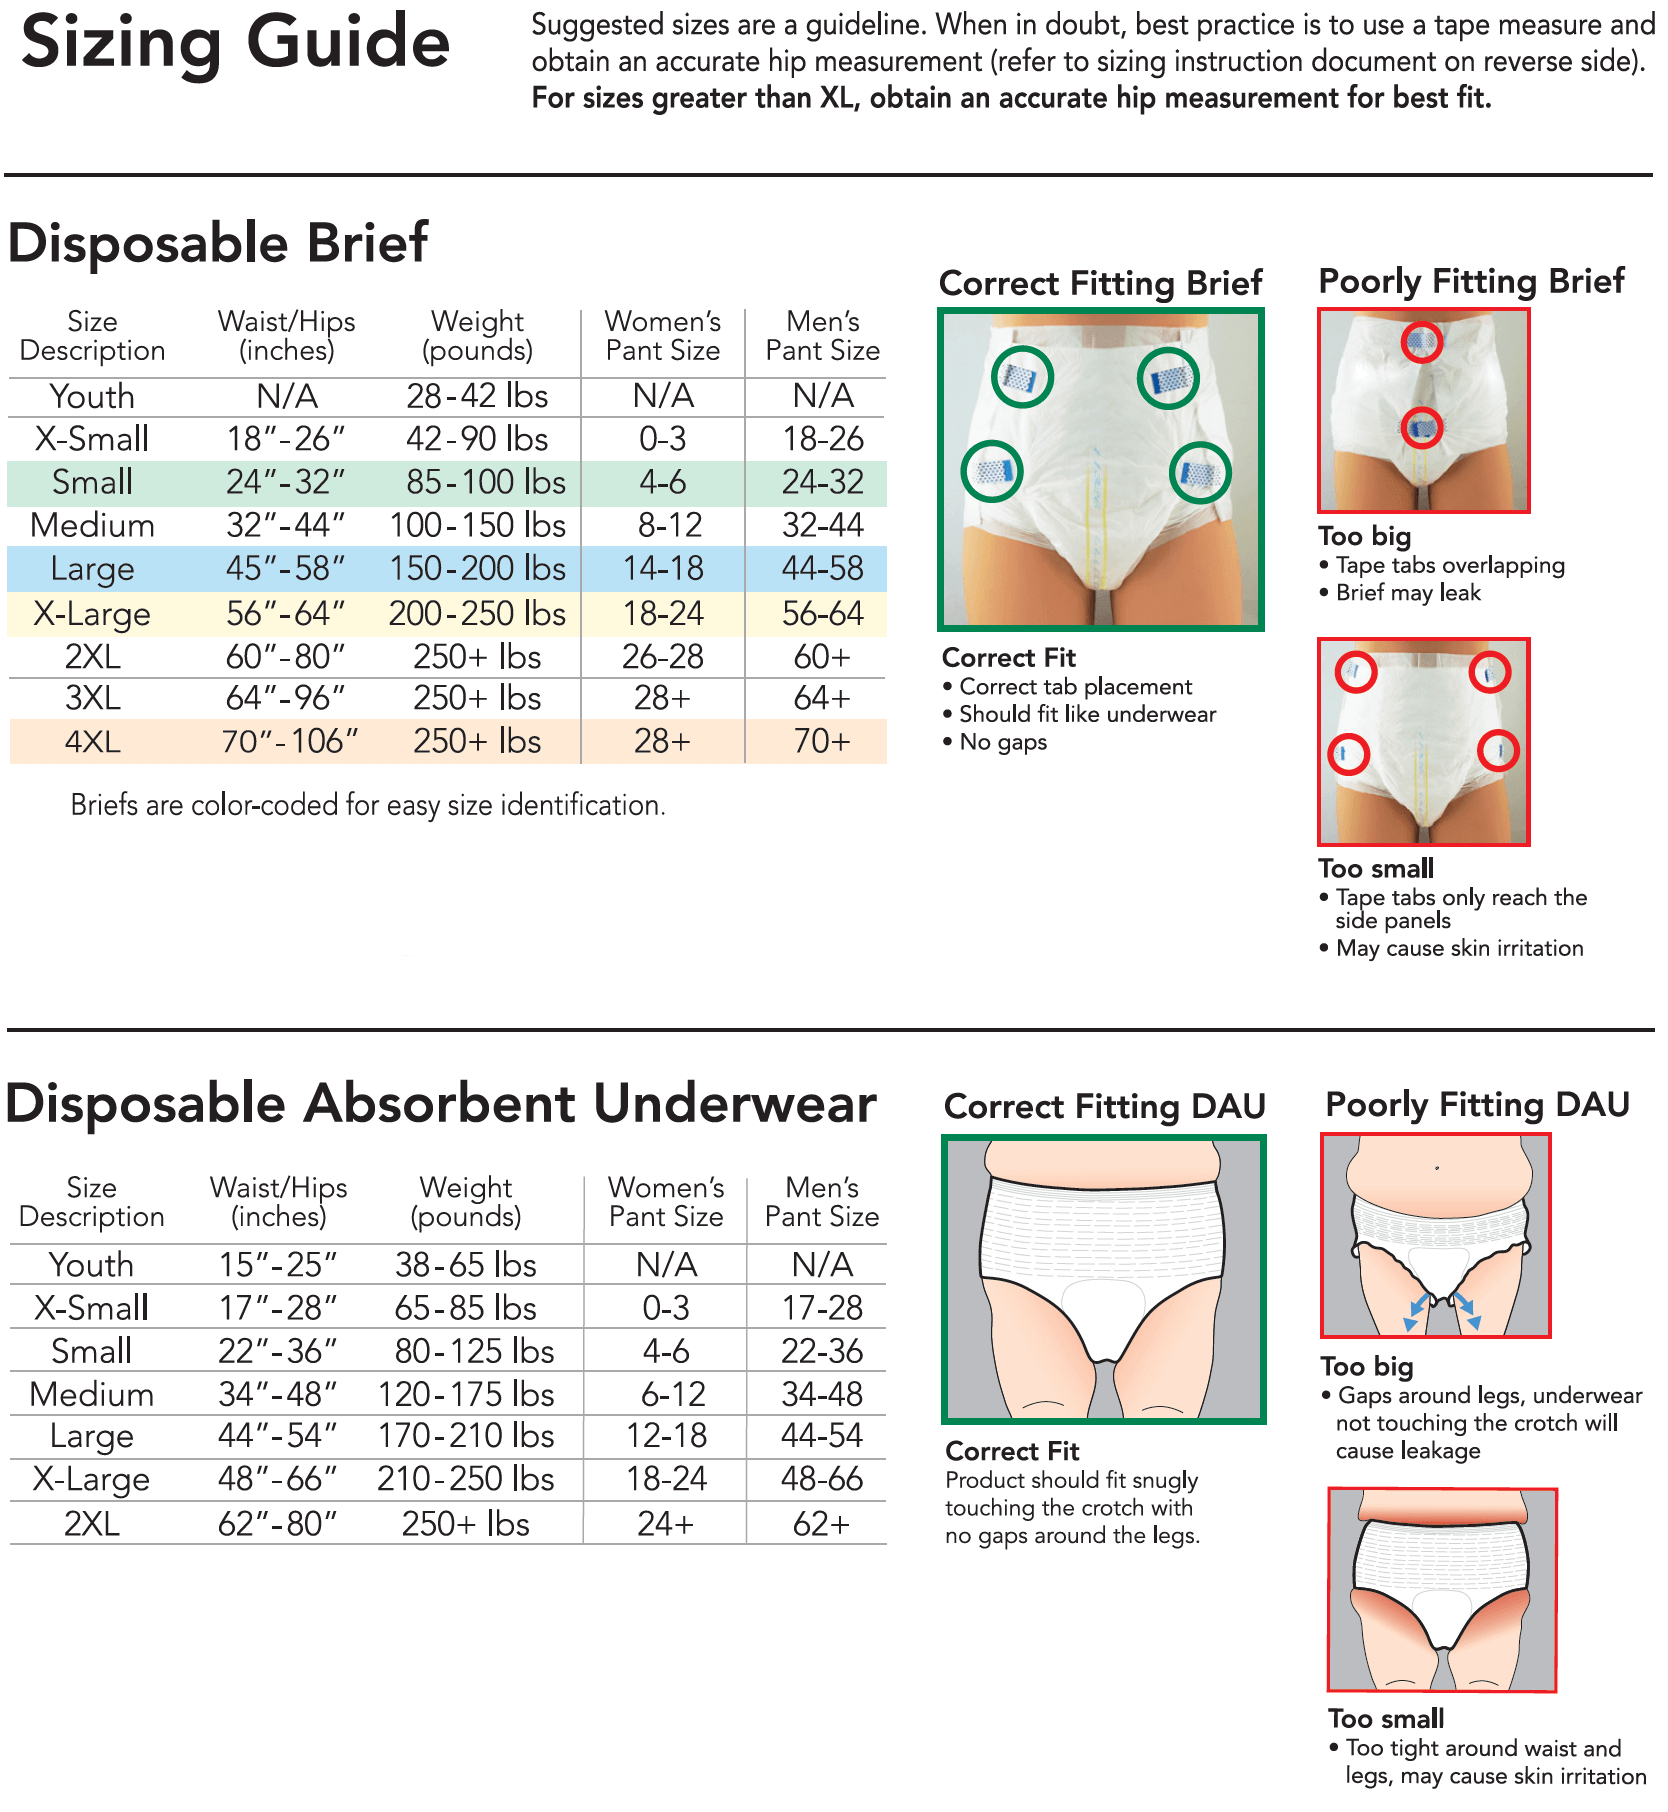 Tranquility Size Guide for Adult Diapers & Briefs - Tranquility